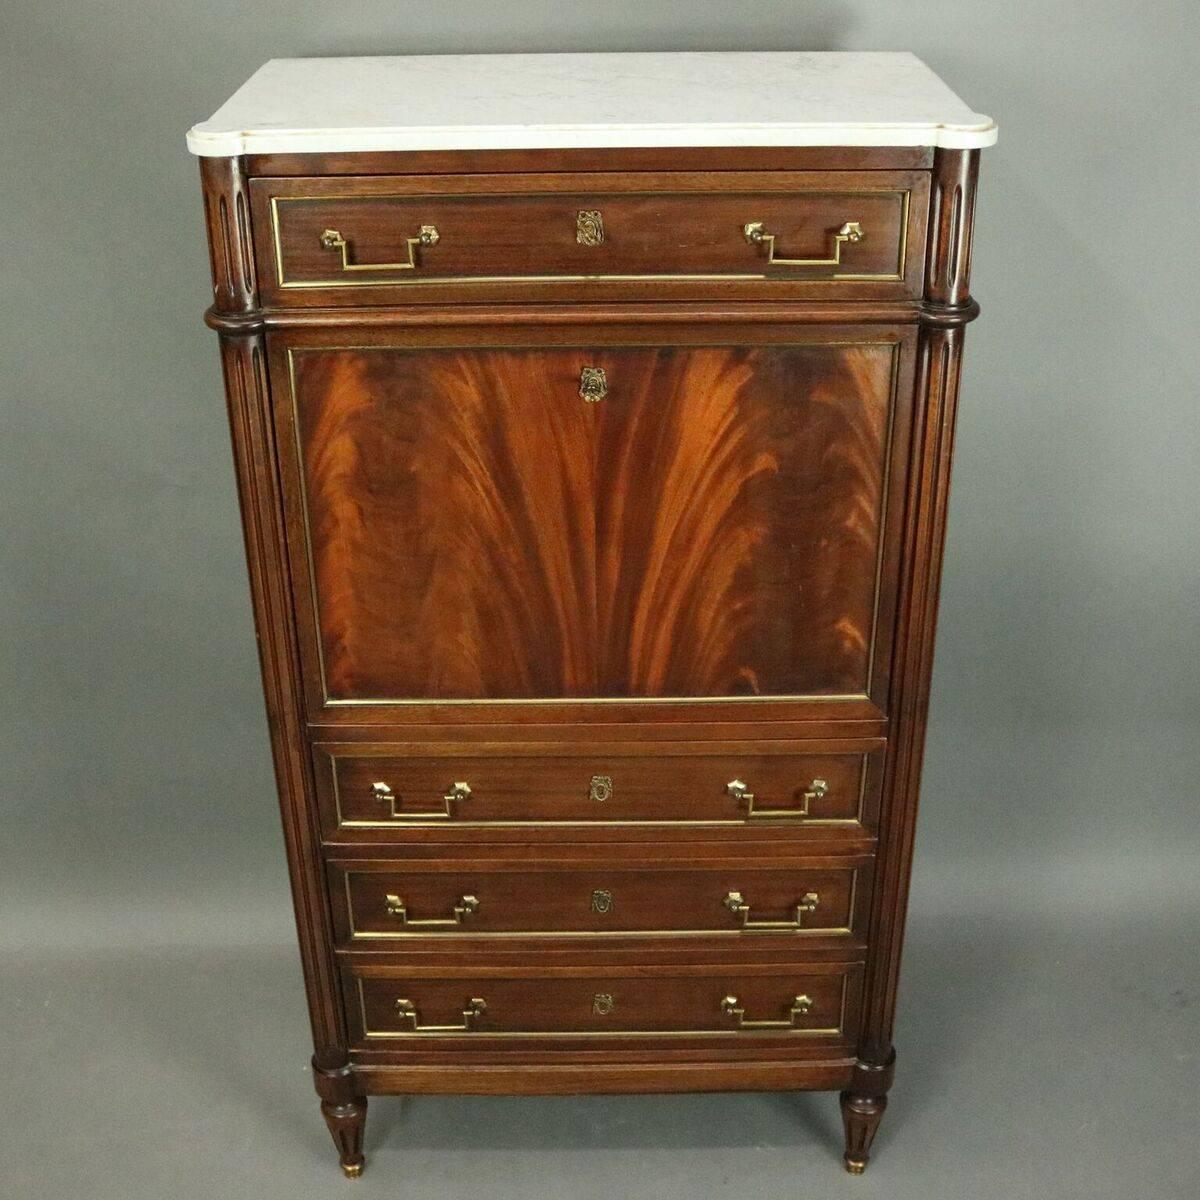 Antique Fench Louis XVI custom abattant features mahogany construction with marble top, flanking reeded columns, flame mahogany drop-front revealing gilt leather writing surface and interior storage, three long drawers below with one above, bronze